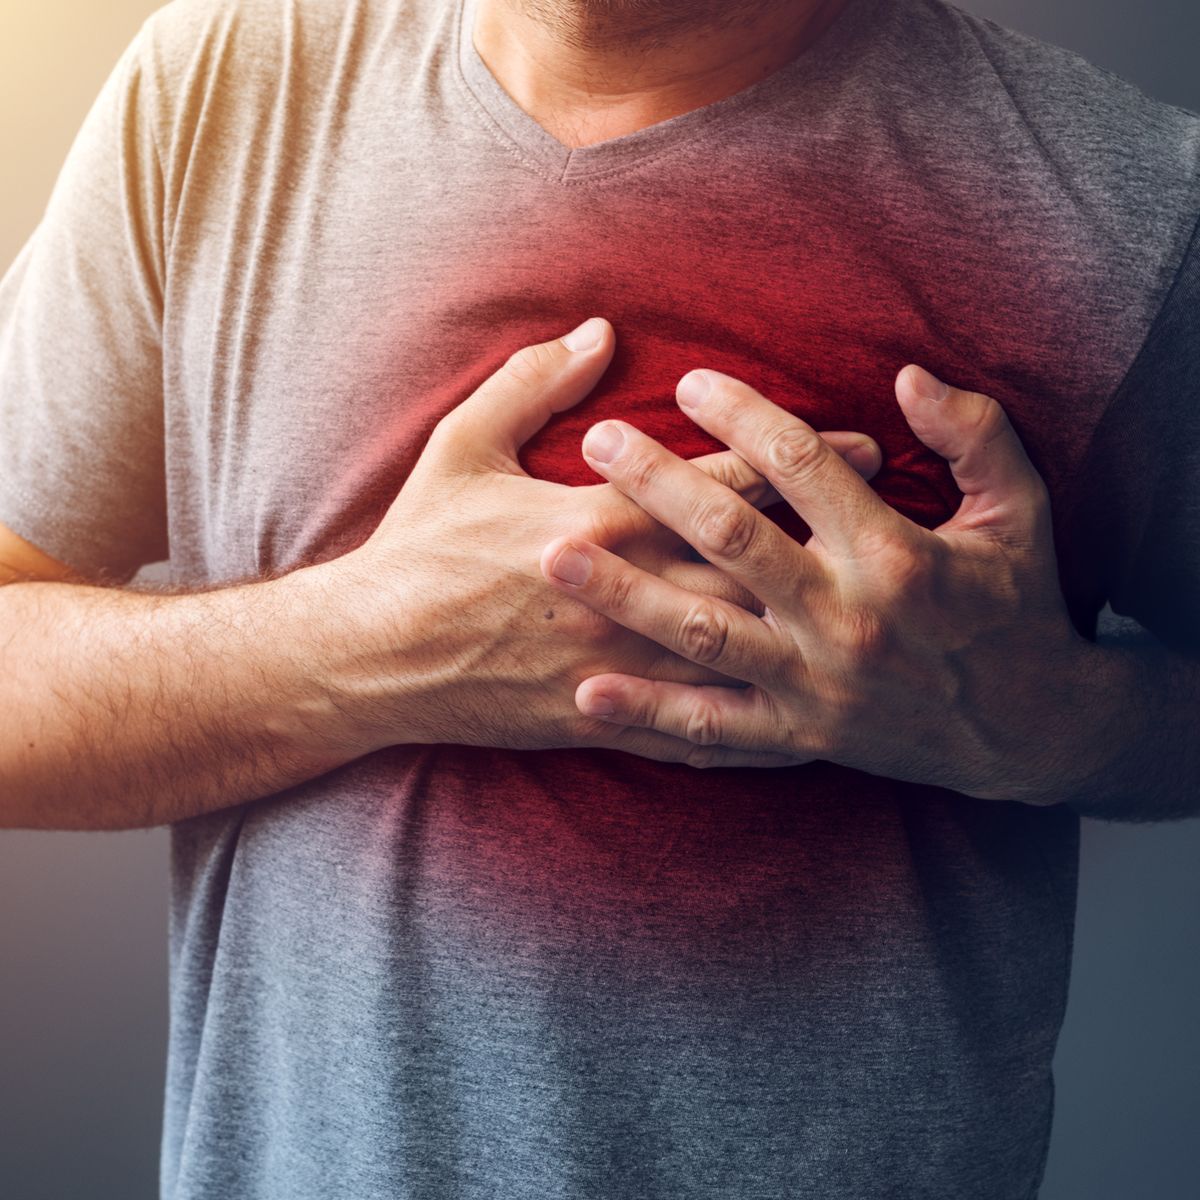 Back Pain: Could it be Your Heart?: Phoenix Heart: Cardiologists